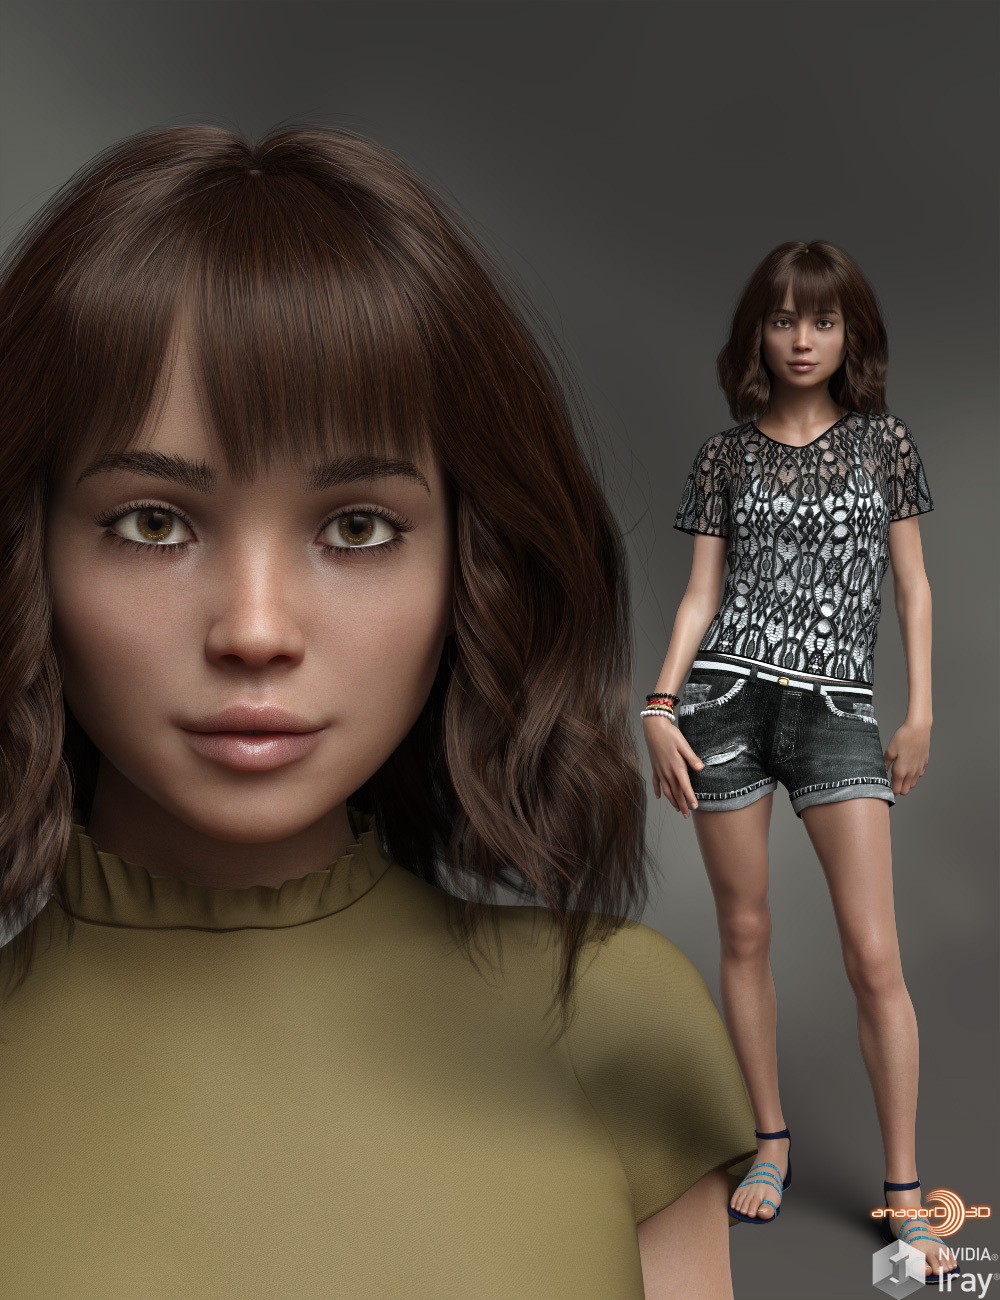 Anagord Teens G8F Vol 7 by: Anagord, 3D Models by Daz 3D